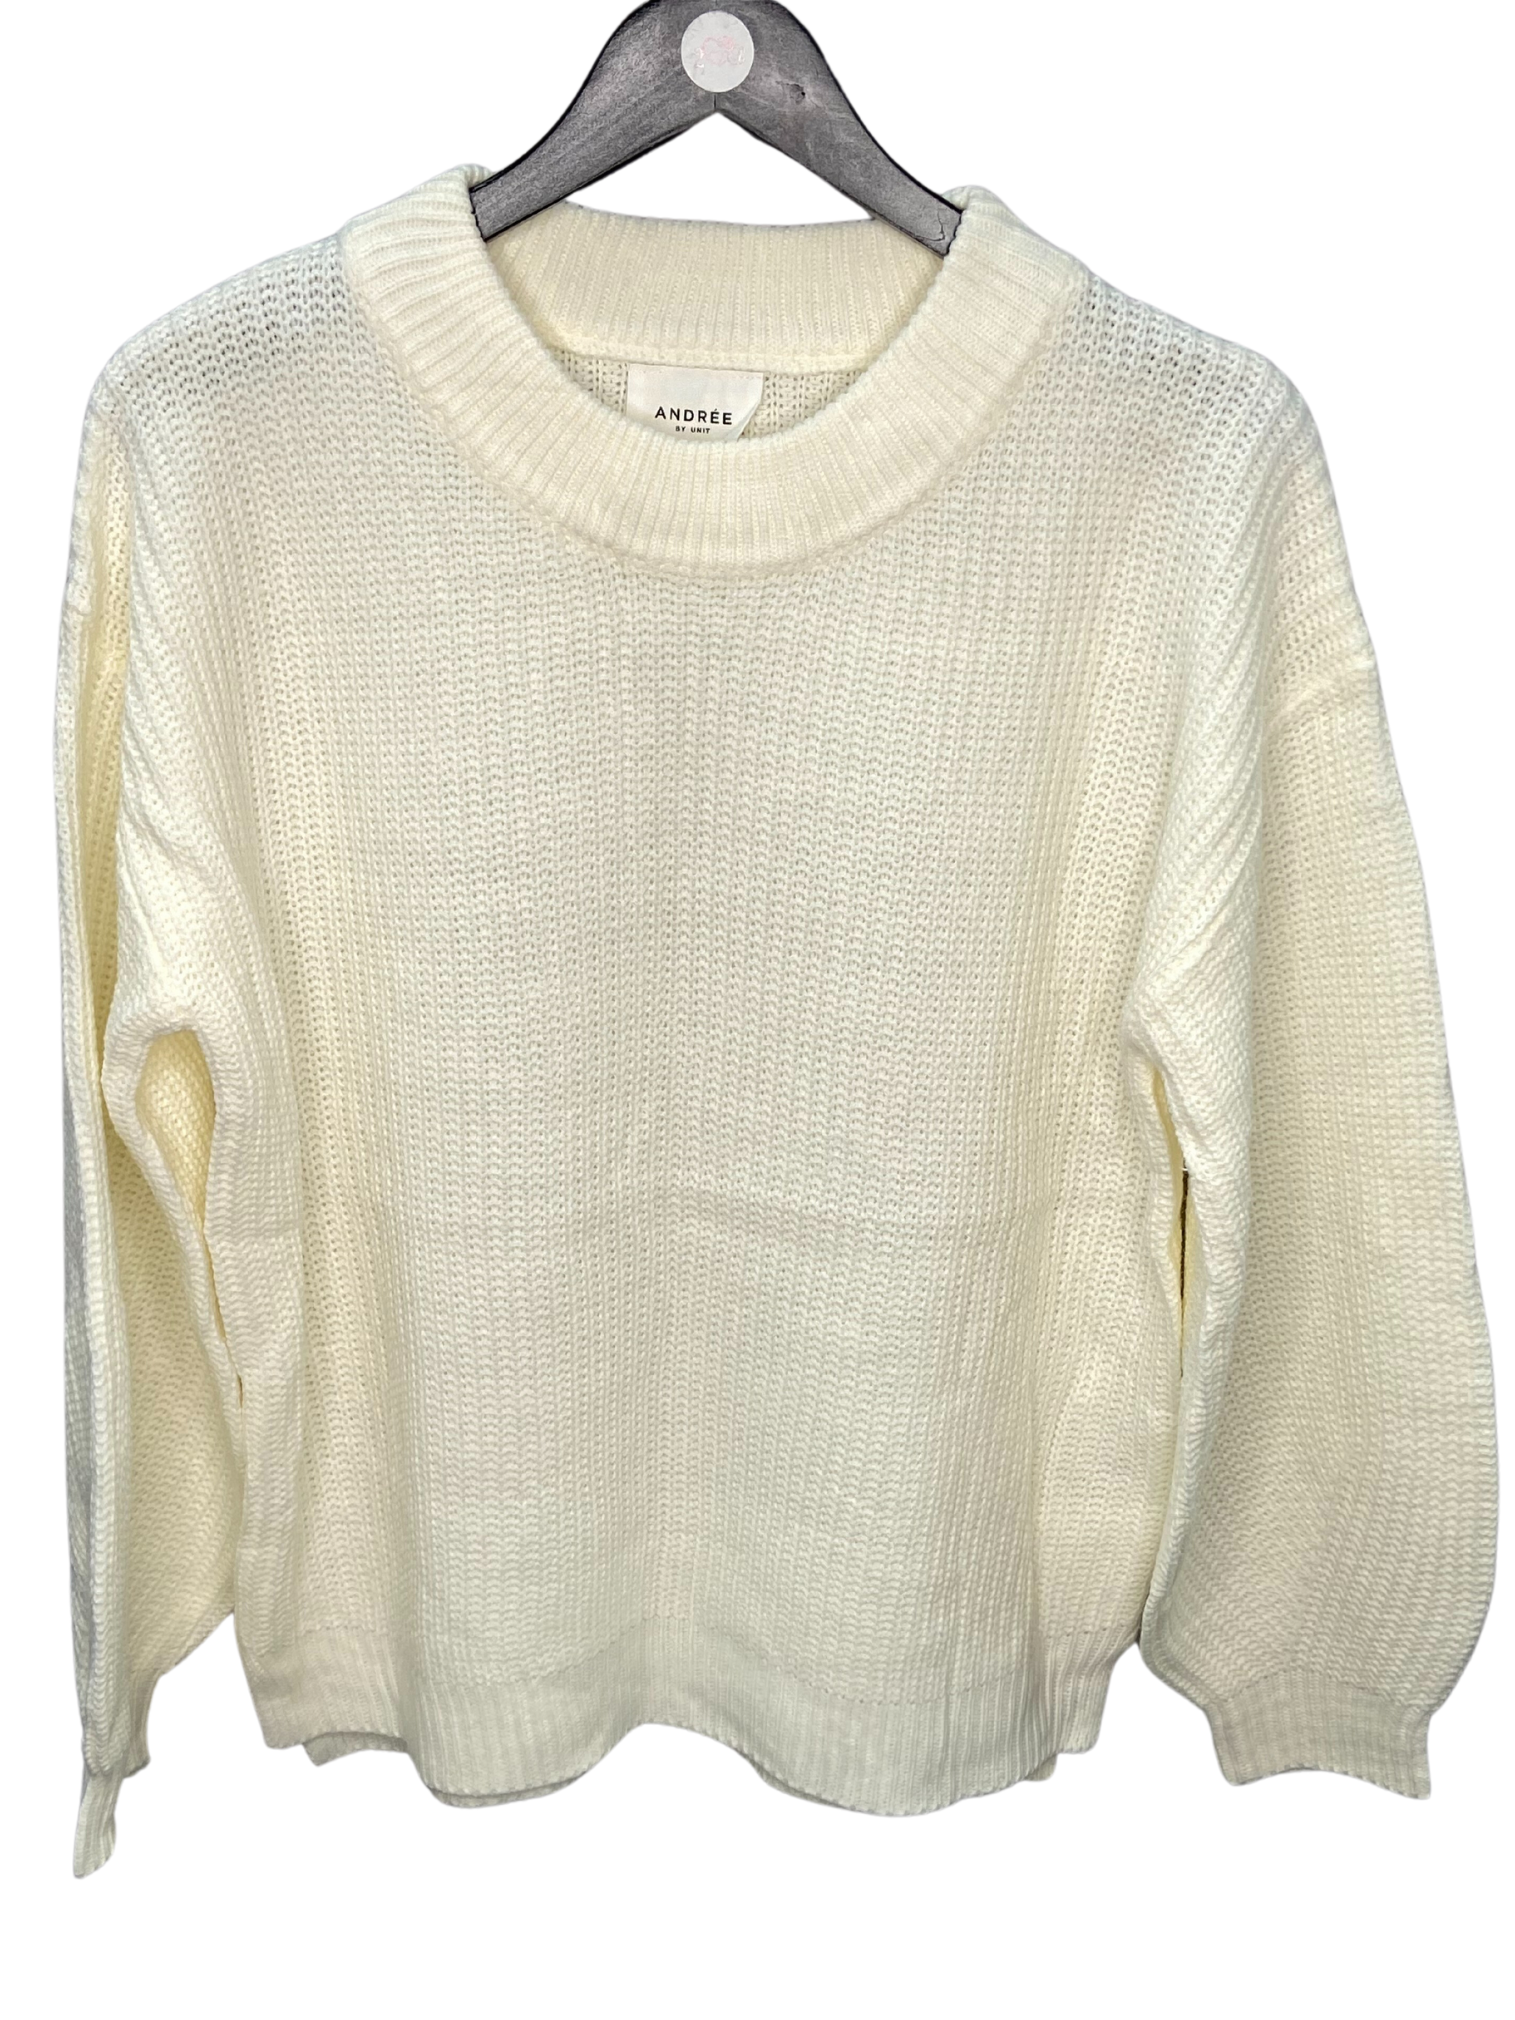 Round Neckline Sweater with Balloon Sleeves in Ivory